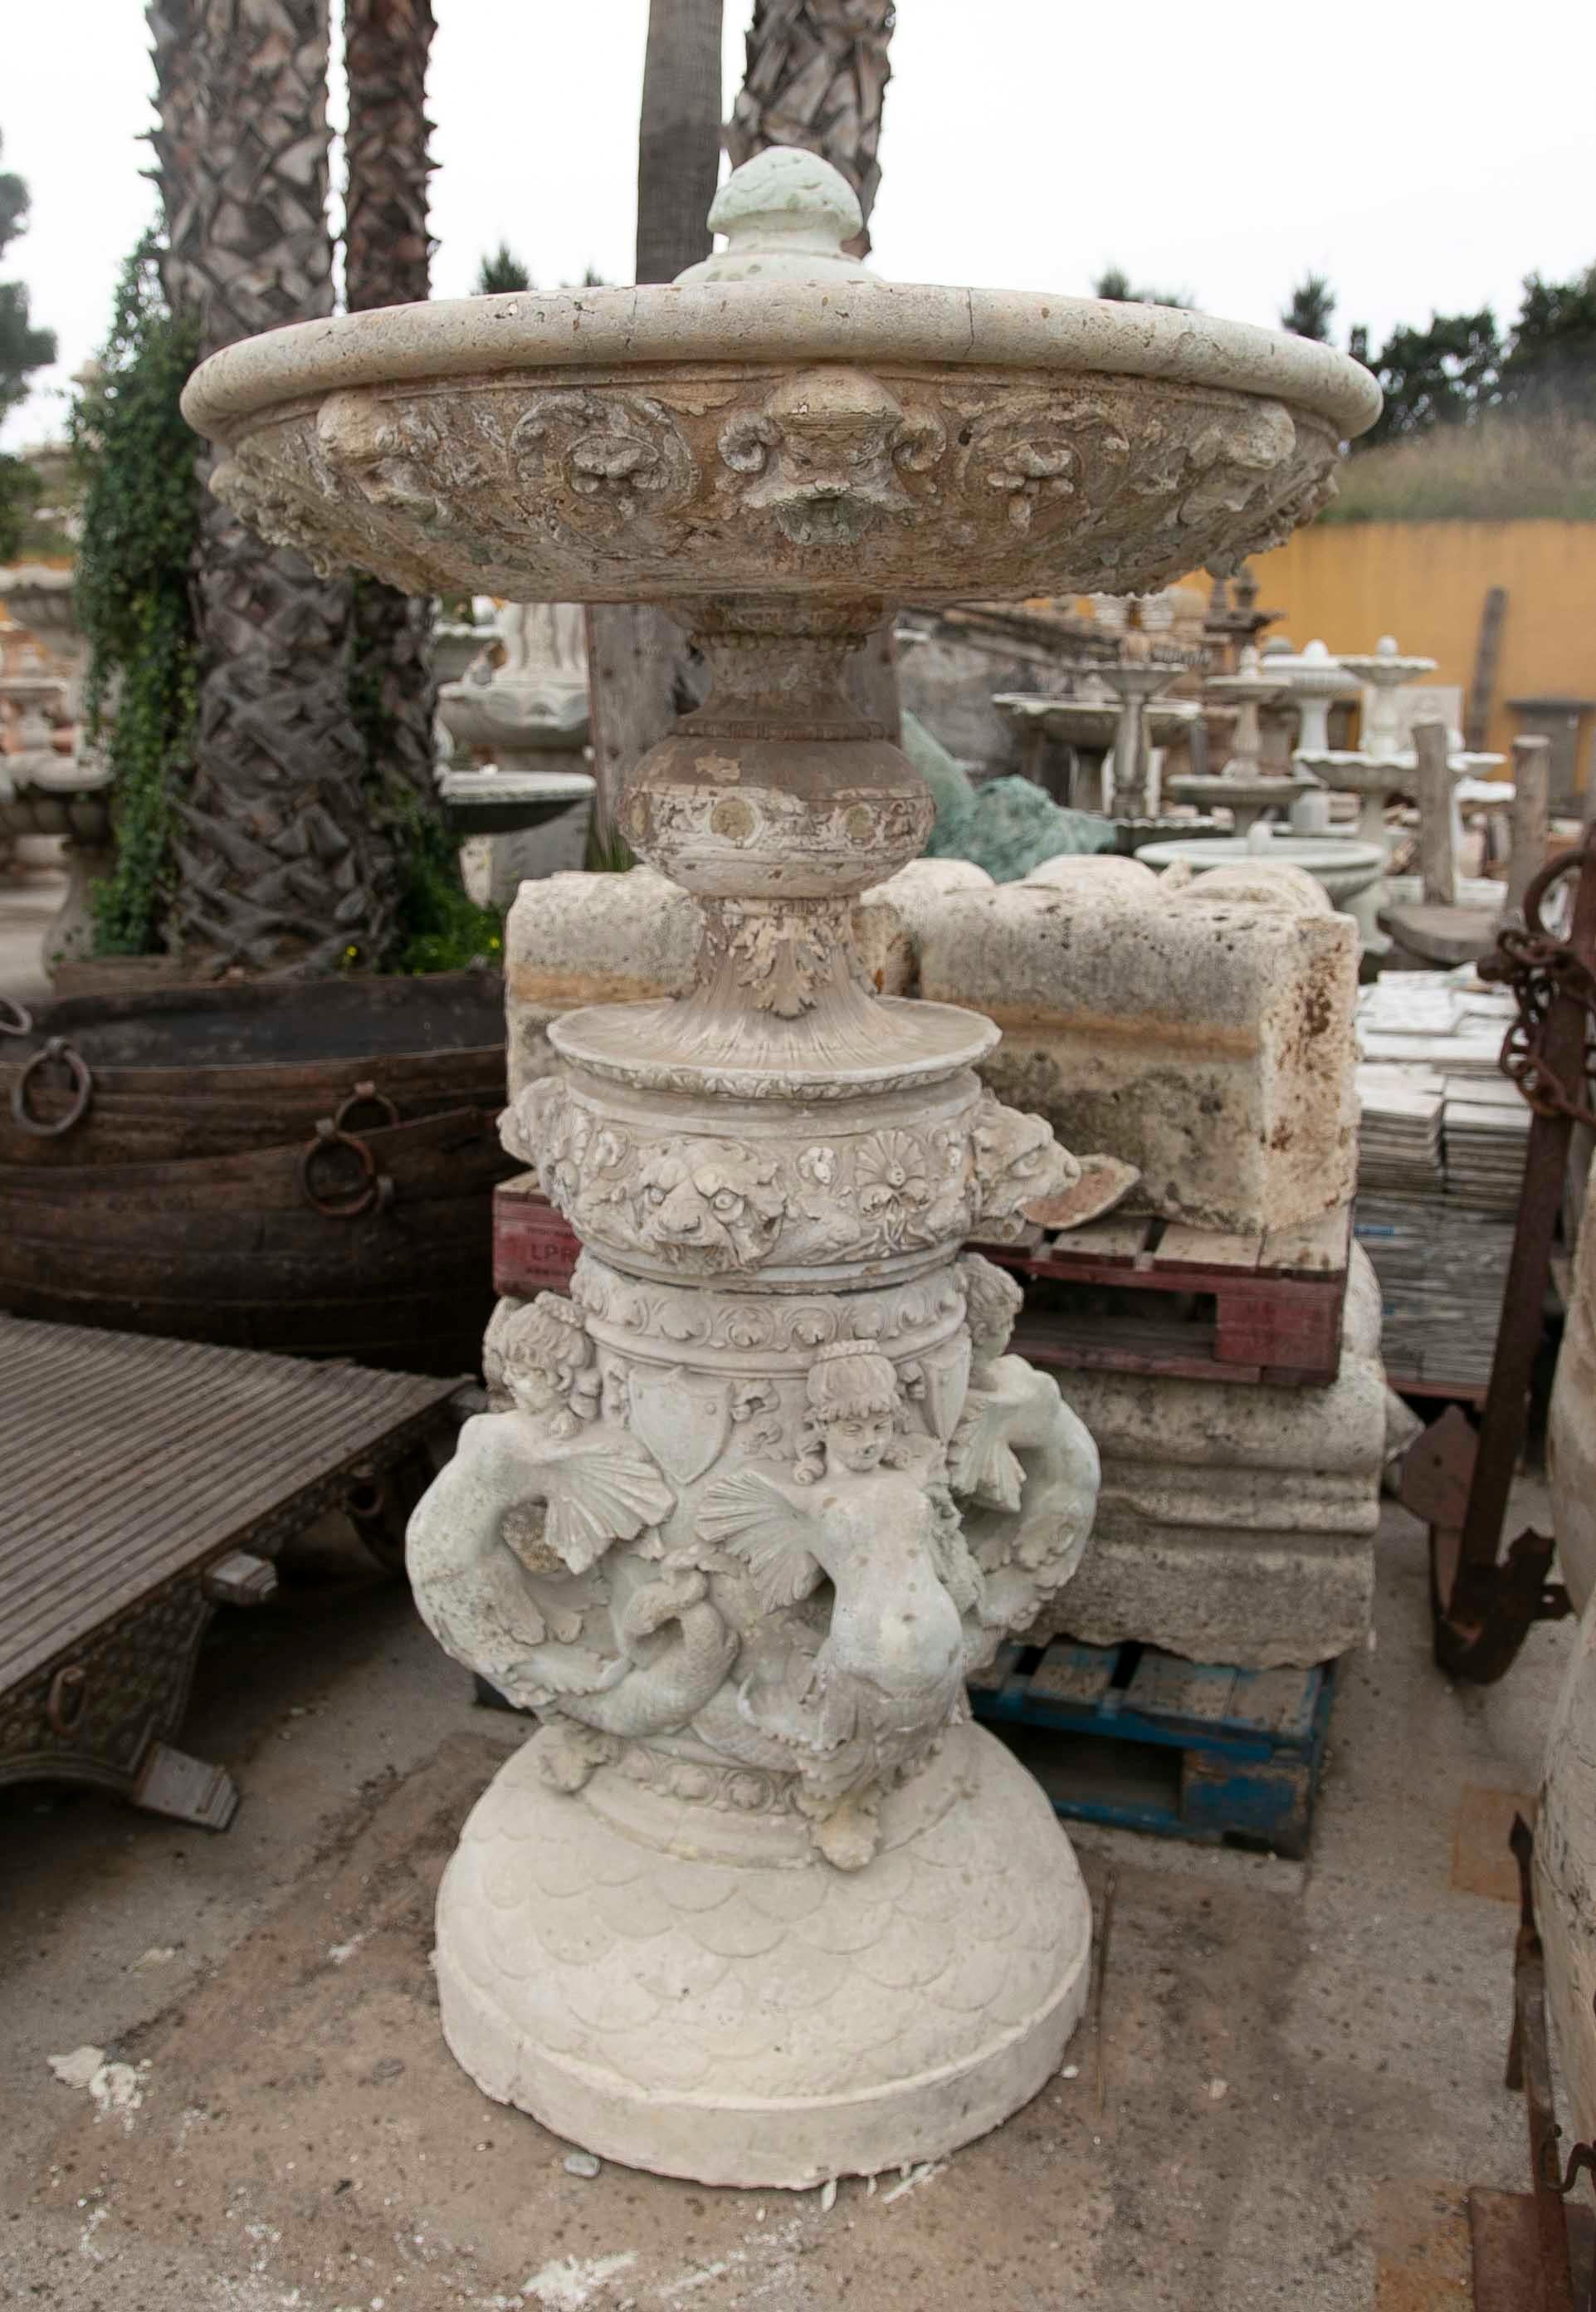 A hand-carved stone centre fountain decorated with fantastic animals and plant scrolls on the upper plate, in the centre we can see the decoration of a family coat of arms and more plant motifs, the lower part decorated with women with fishes on the